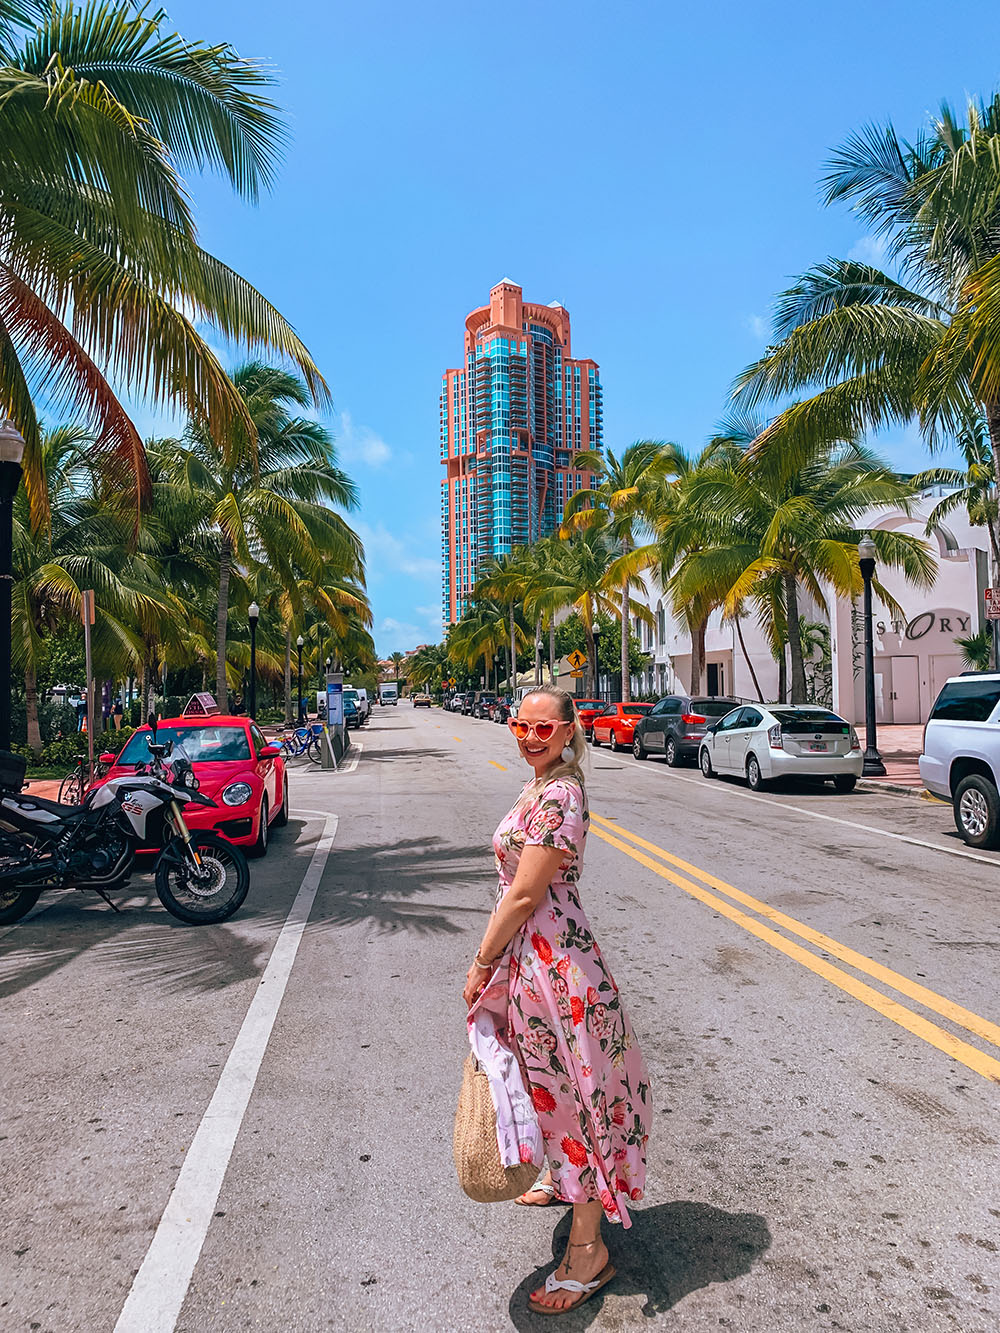 So you've planned a wonderful 4 day trip to Miami and now you're looking for the perfect itinerary for your visit… well, this guide is for you! I’ve put together the ultimate 4 days in Miami itinerary that will have you seeing and experiencing all of Miami’s top sights and attractions. From South Beach to Little Havana, the Wynwood Arts District to the Everglades, and even a day trip to Key West! This really is the perfect 4 day itinerary to get the most out of your time in Miami.